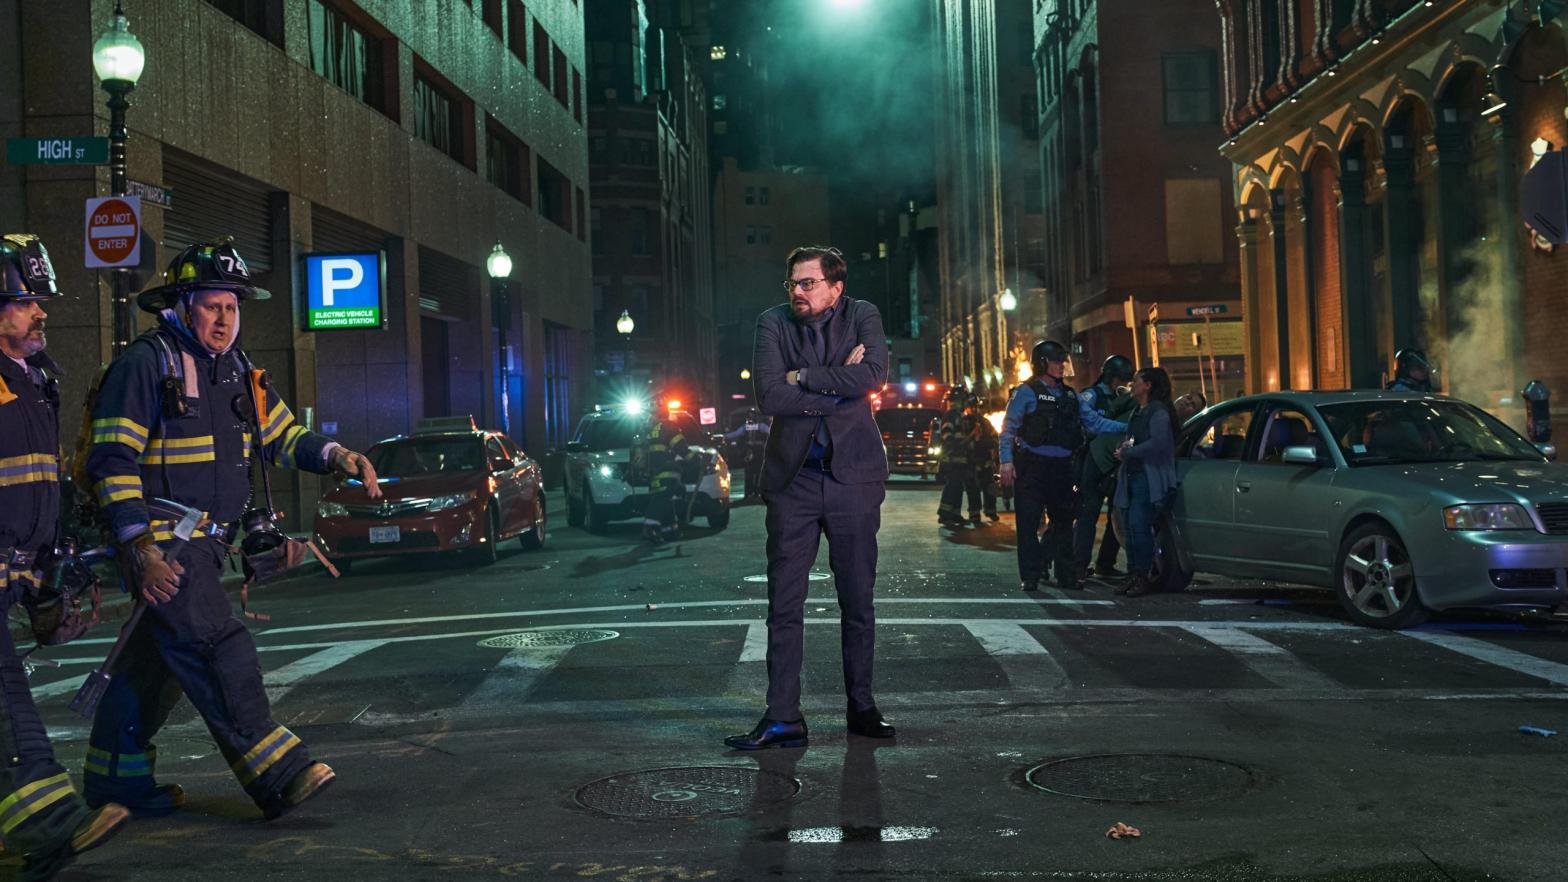 Leonardo DiCaprio stands in the middle of a street in a scene from Don't Look Up. (Photo: Netflix)